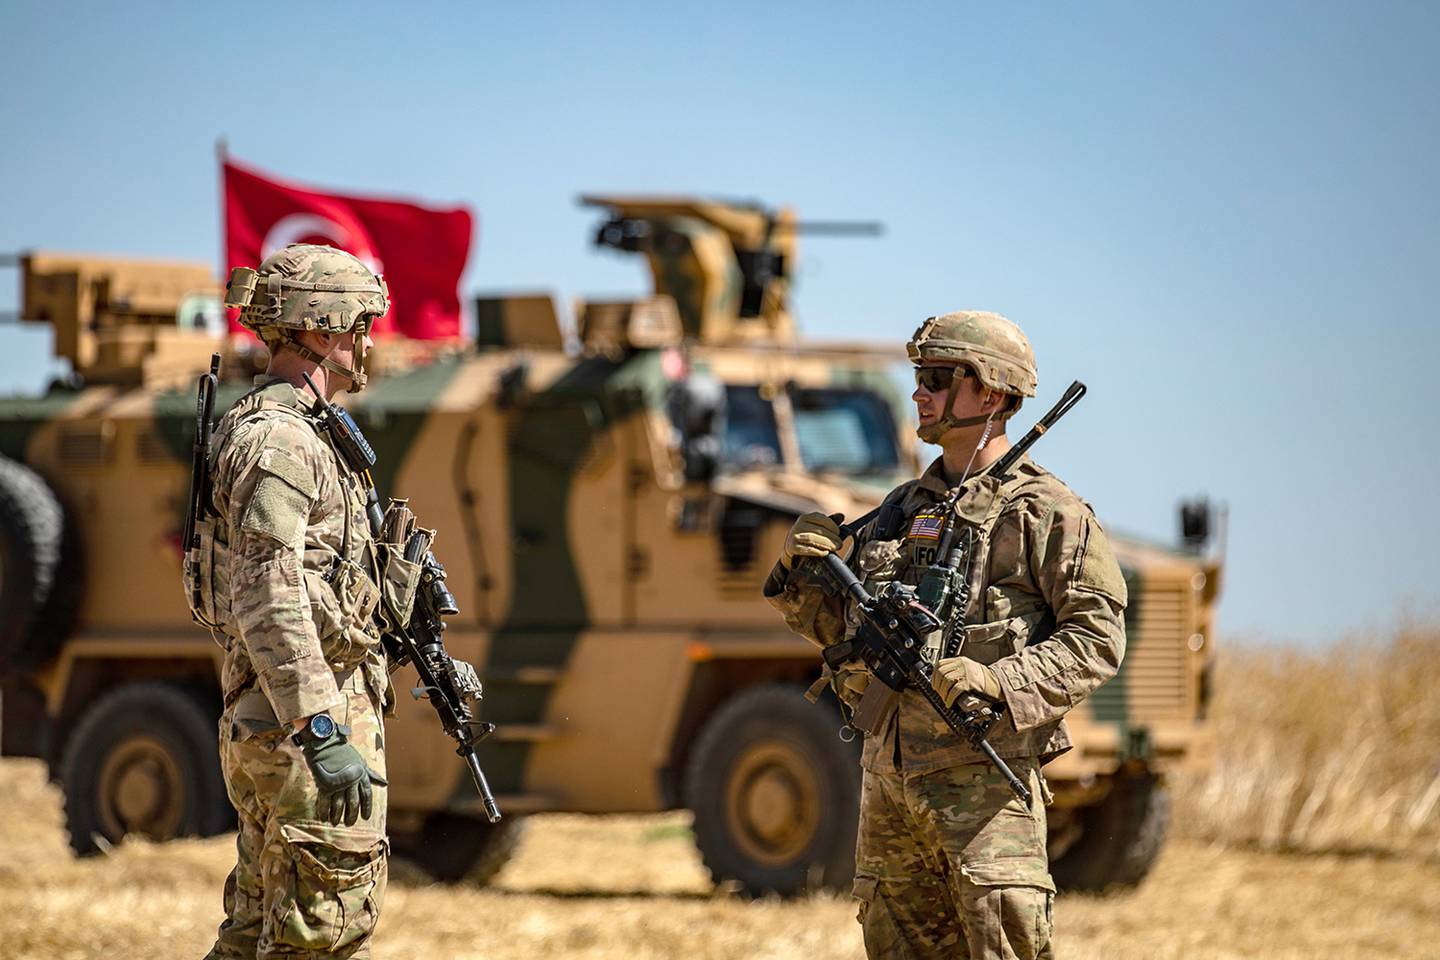 U.S. soldiers chat next to a Turkish military vehicle